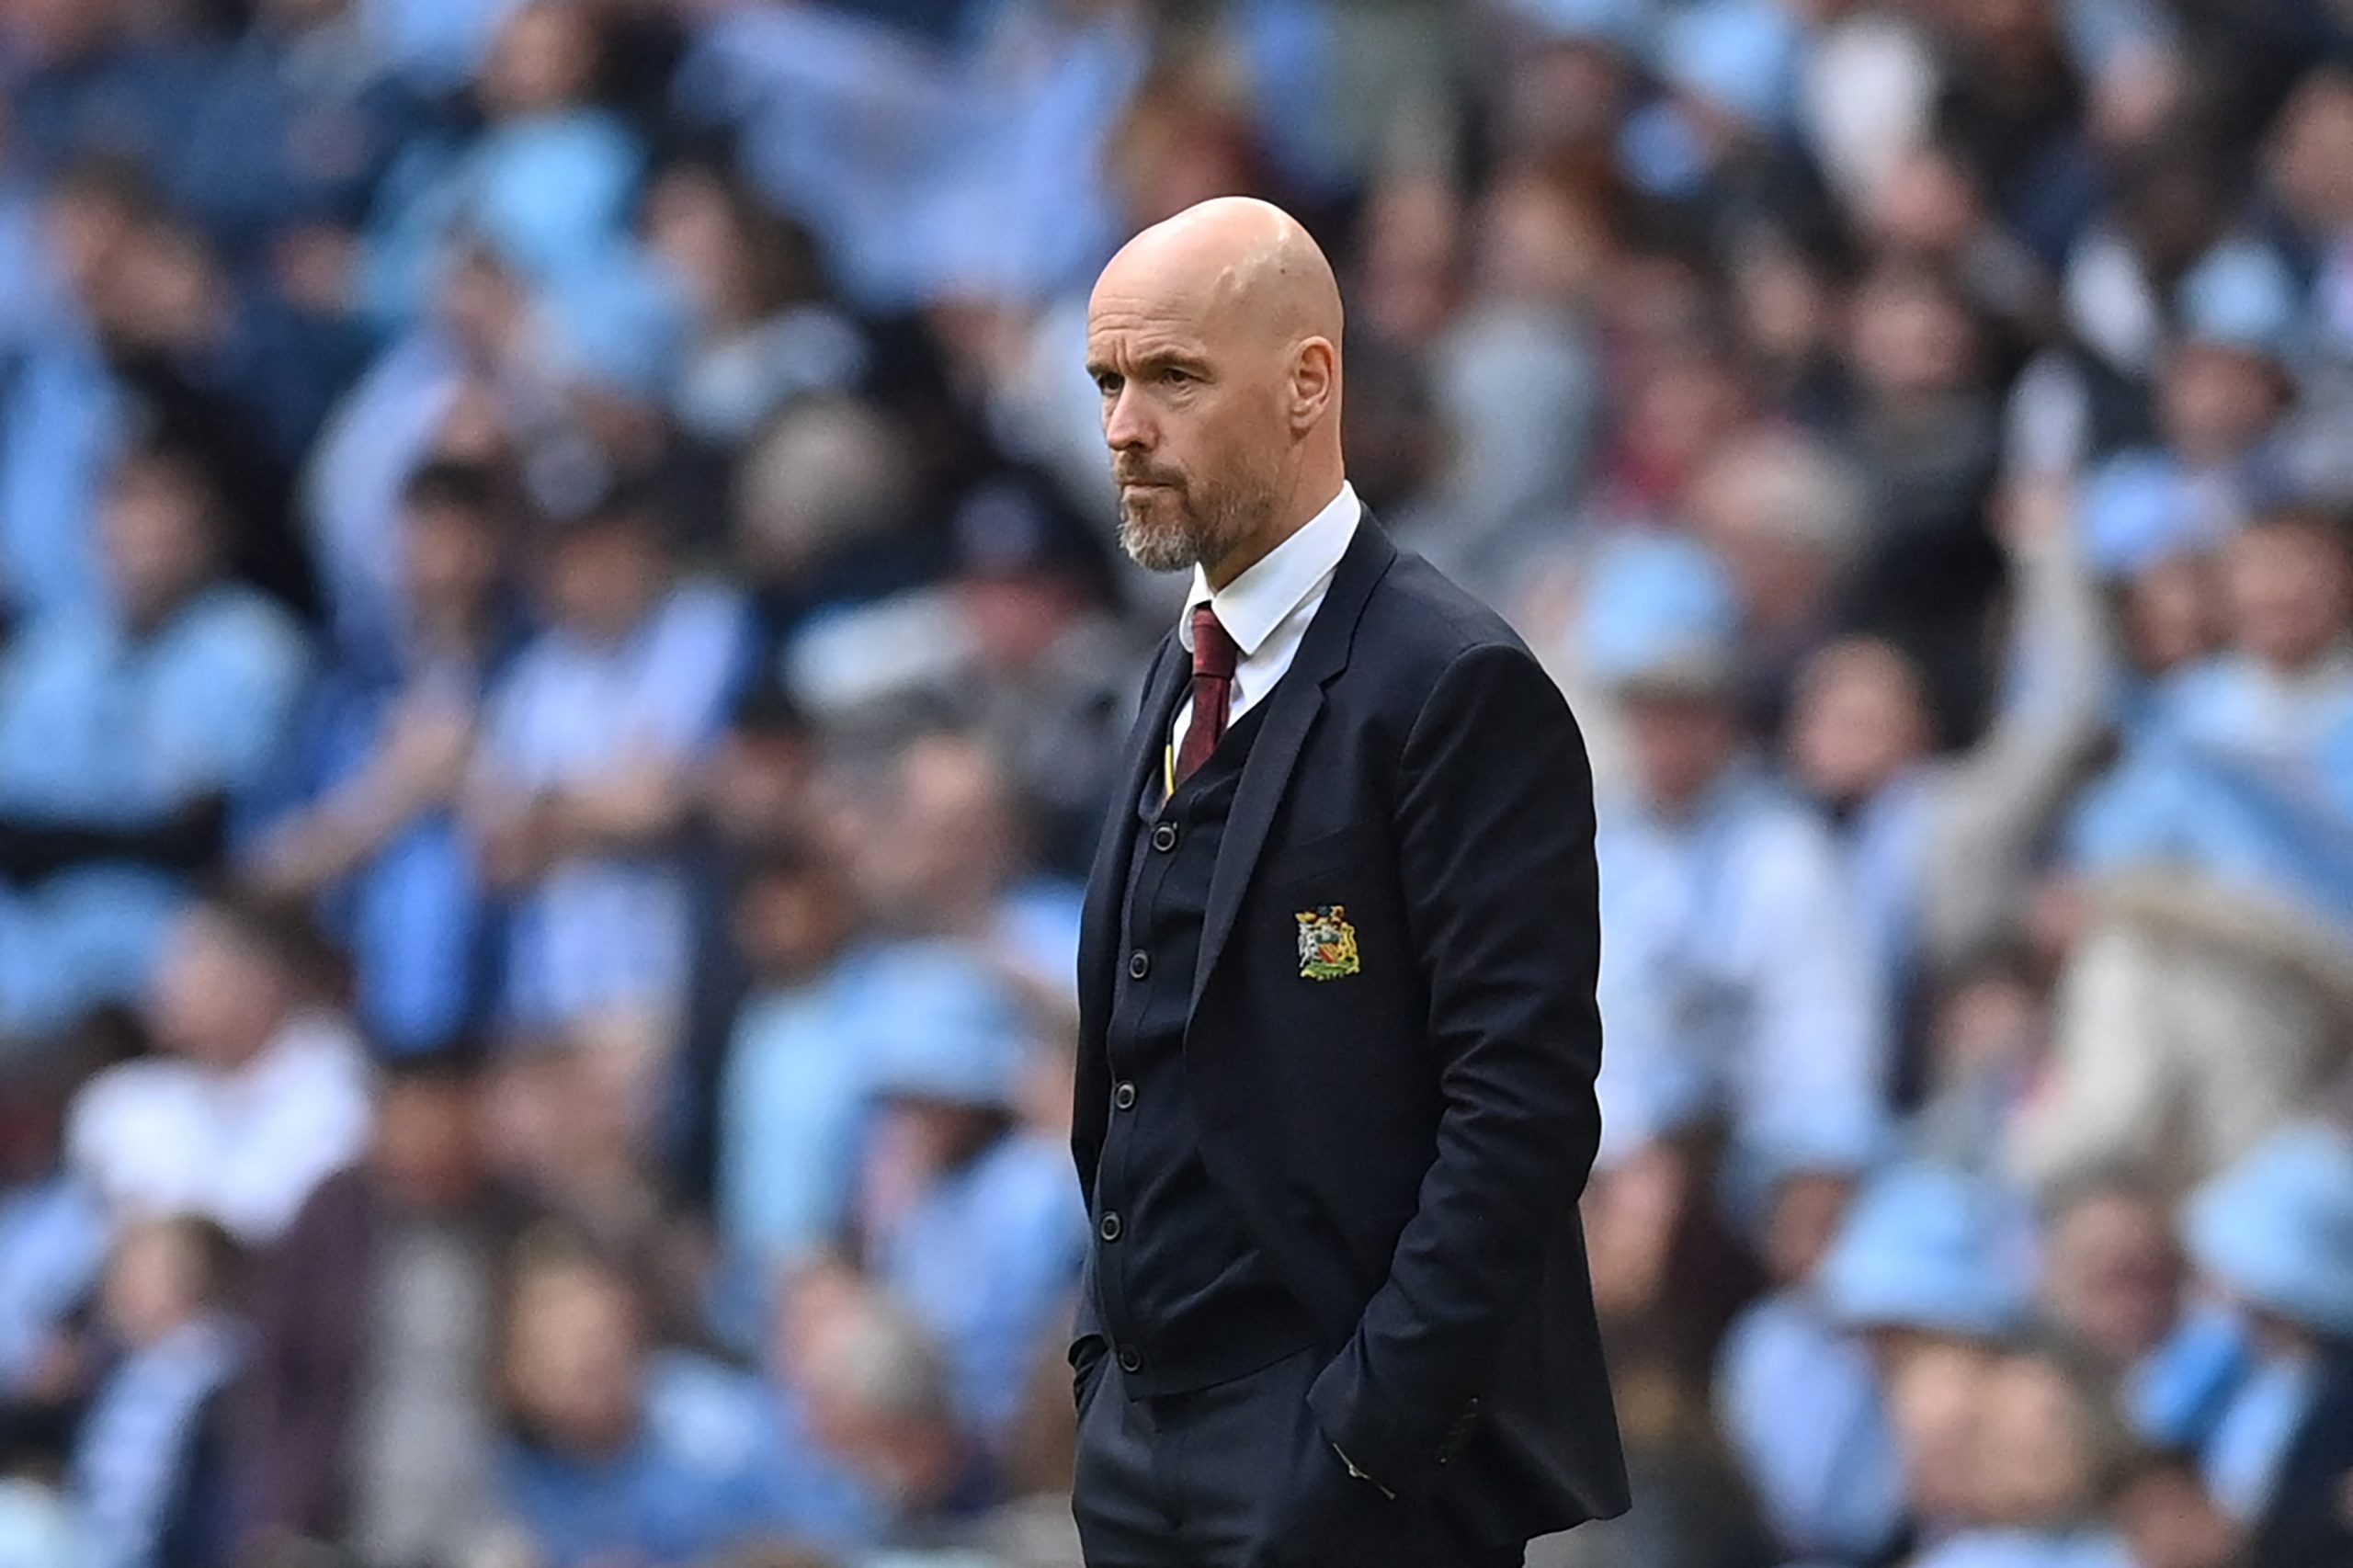 “They already have the best manager” - Erik ten Hag reveals how Manchester United asked him to stay on for next season